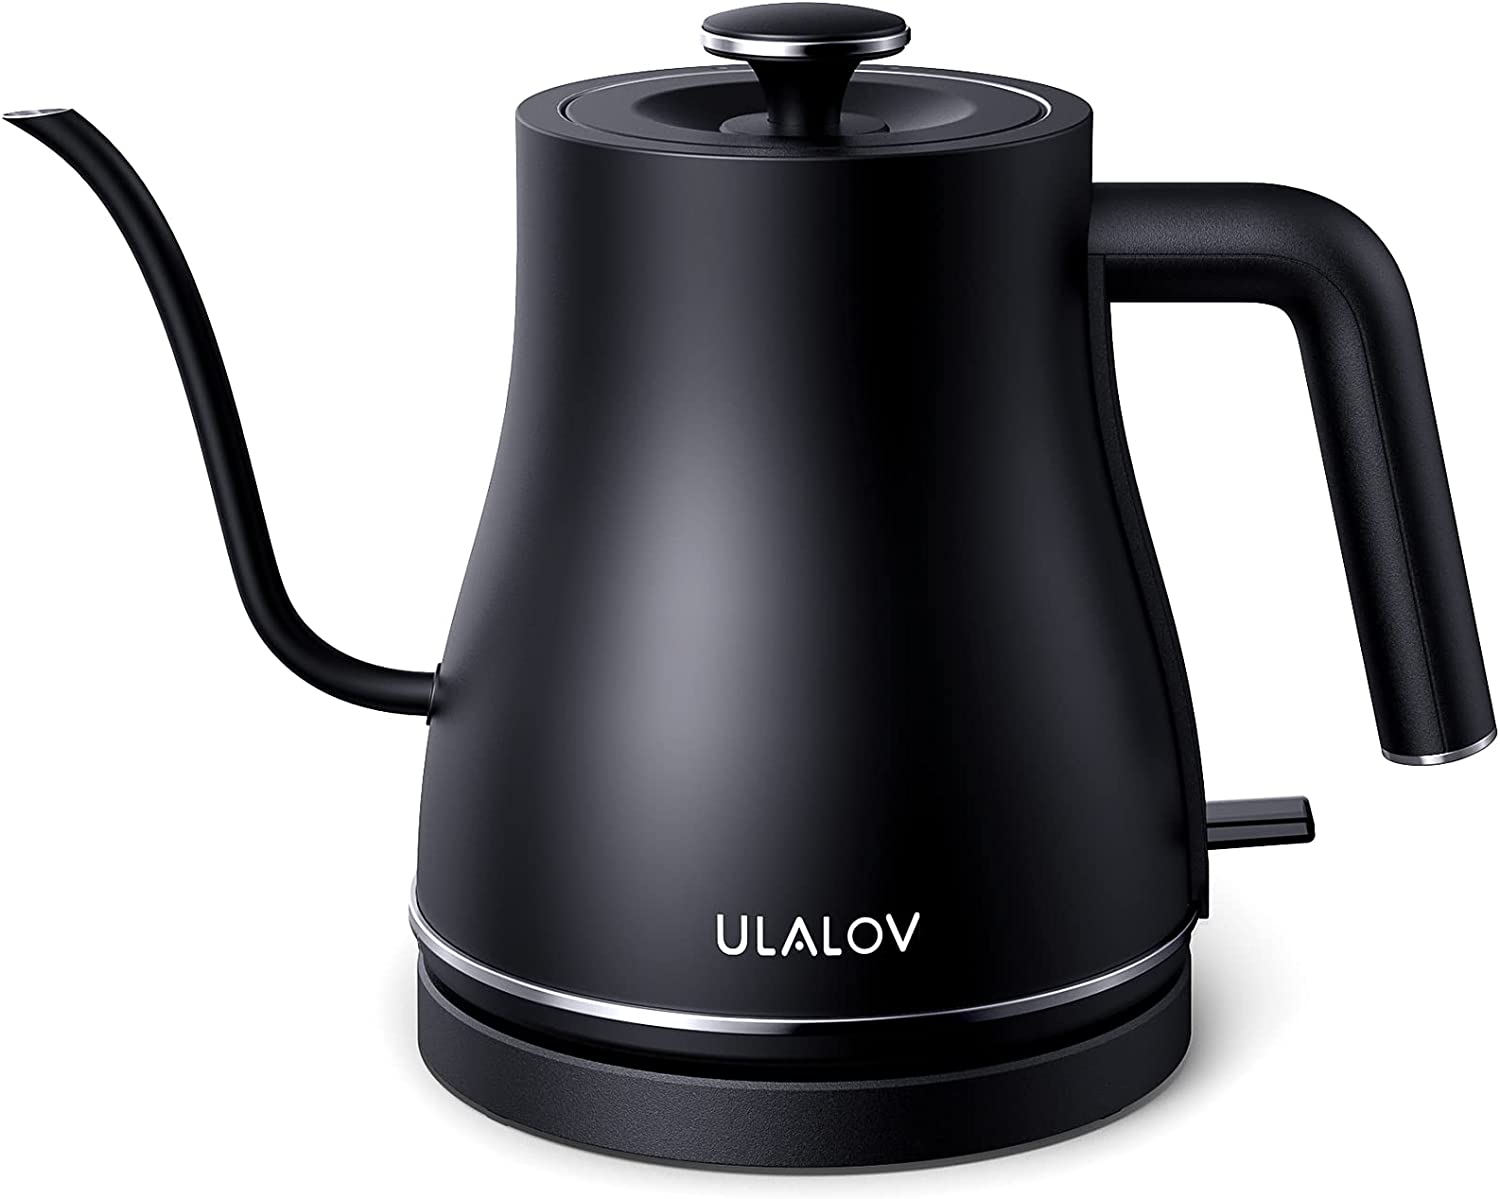 GREECHO 1.7-Liter Temperature Control Electric Kettle